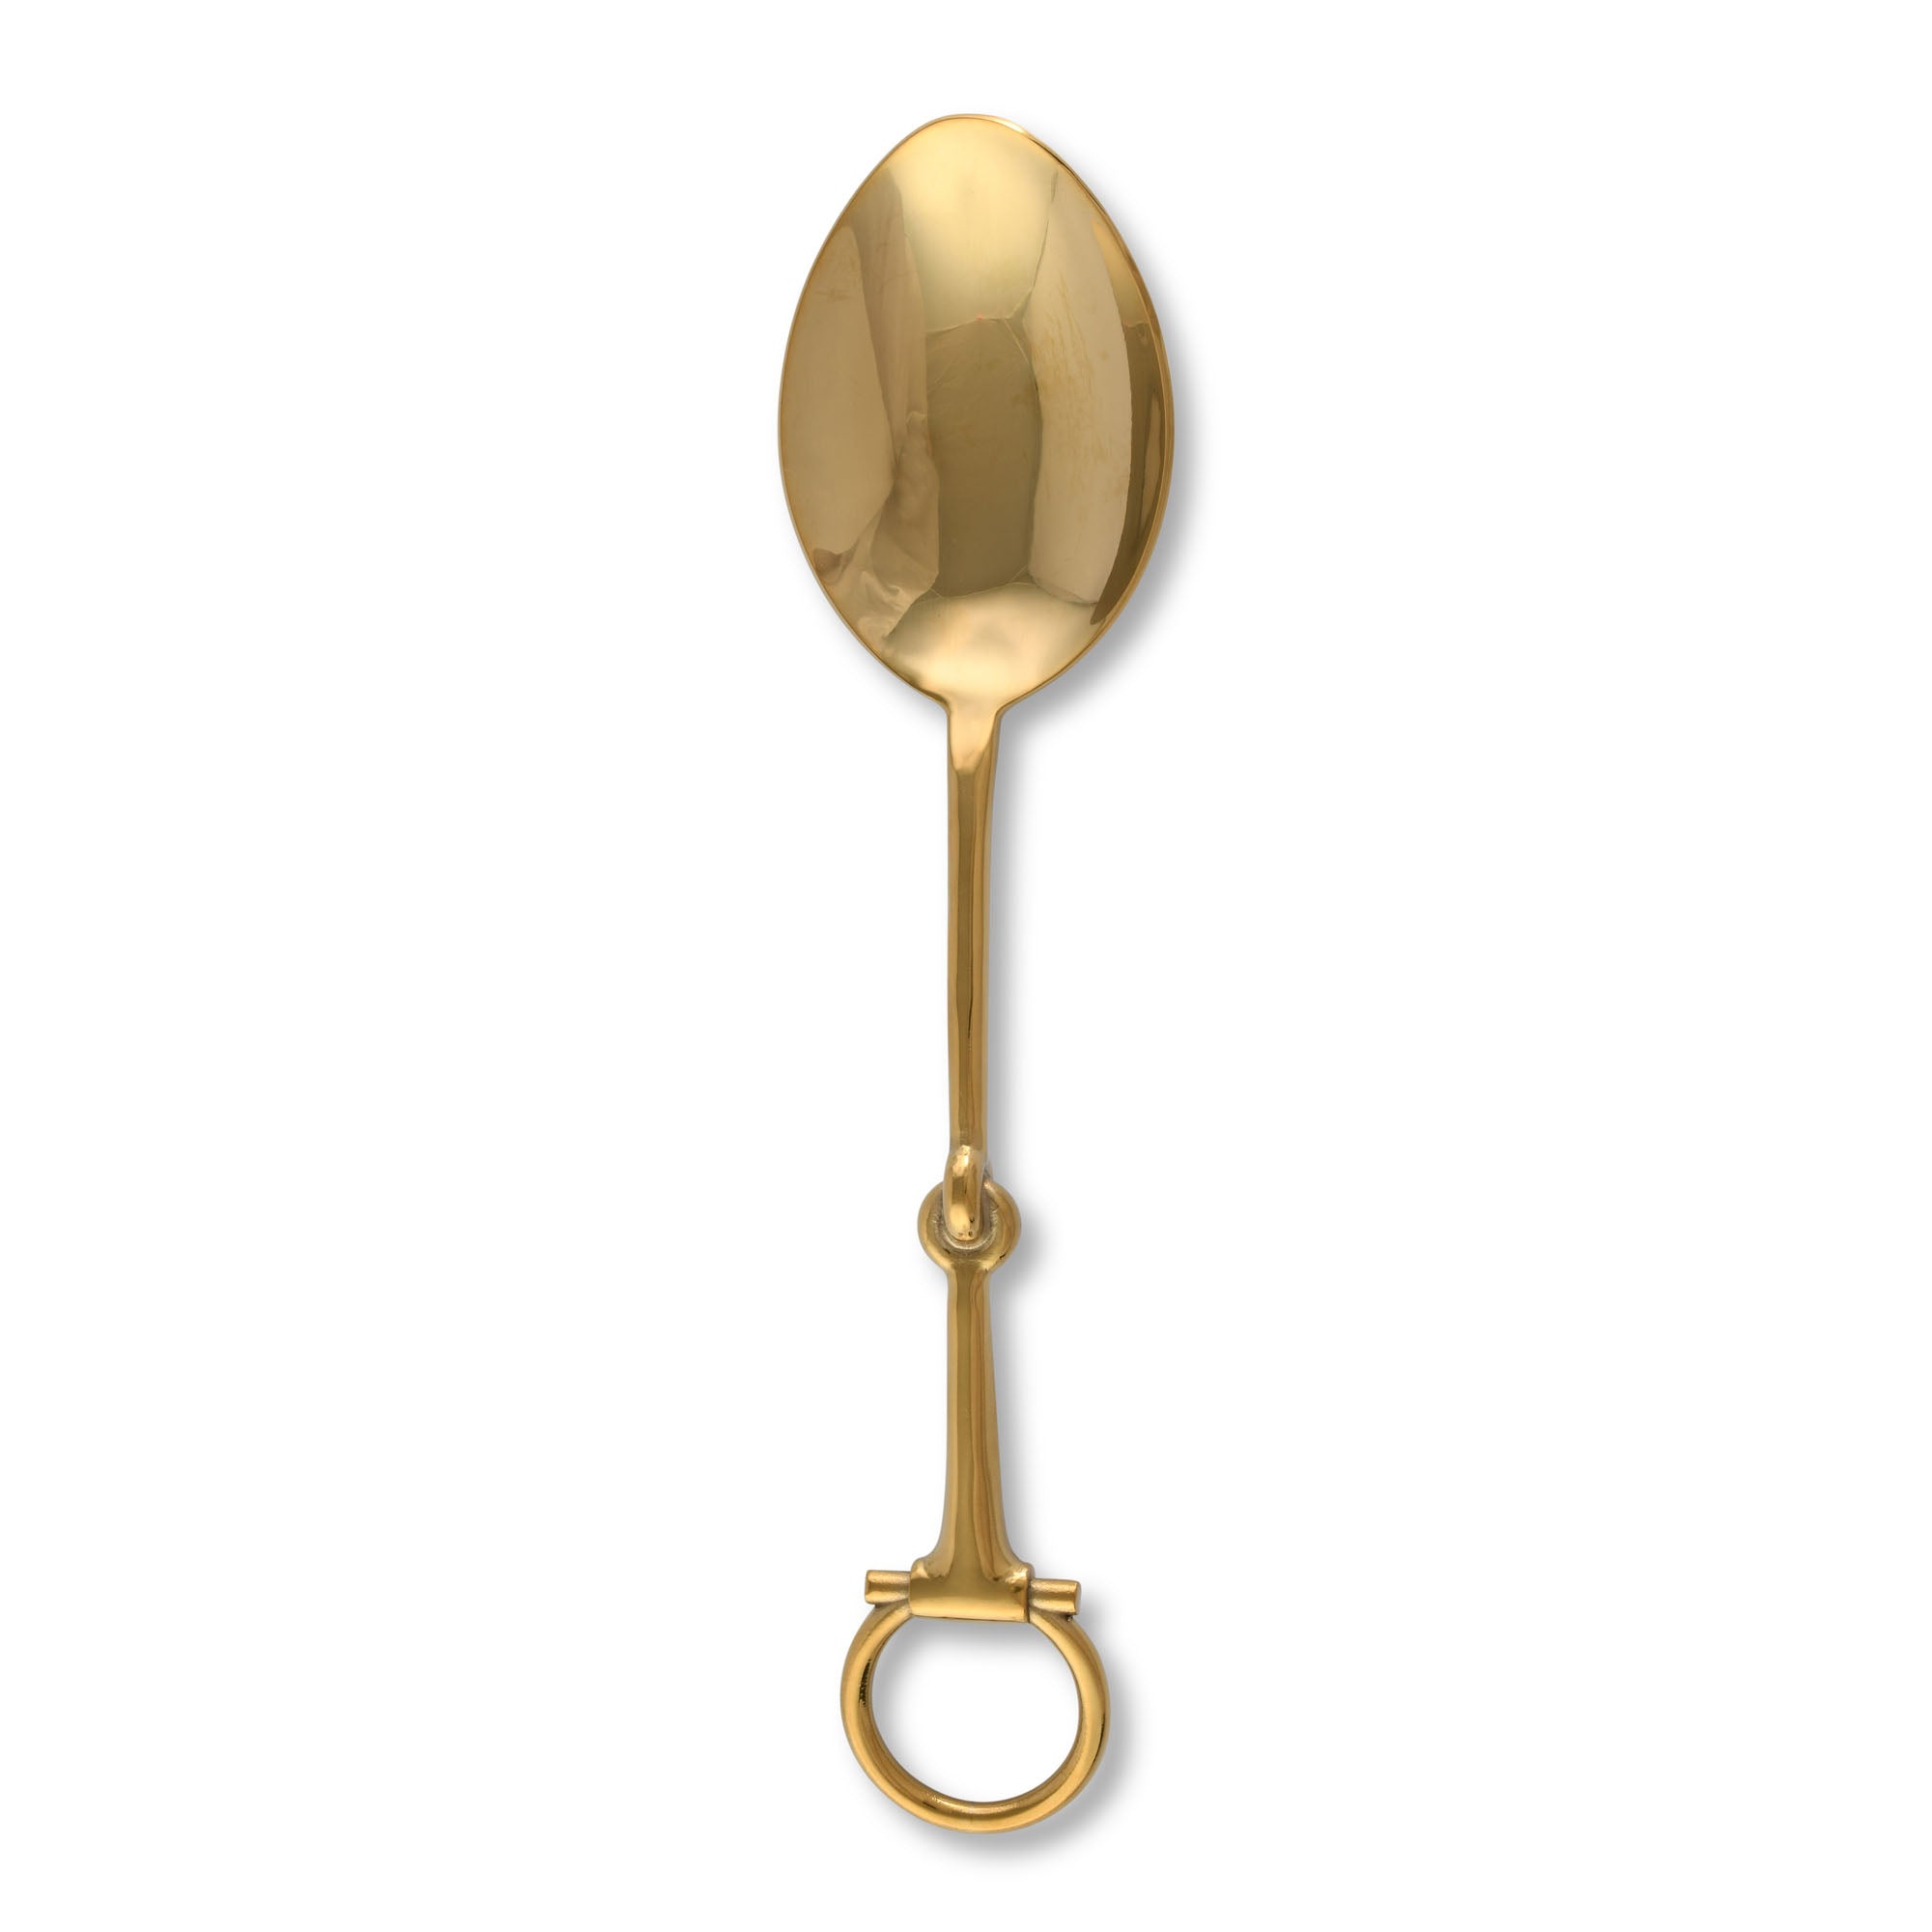 Vagabond House Bit Serving Spoon - Stainless Steel Shinny Gold Product Image